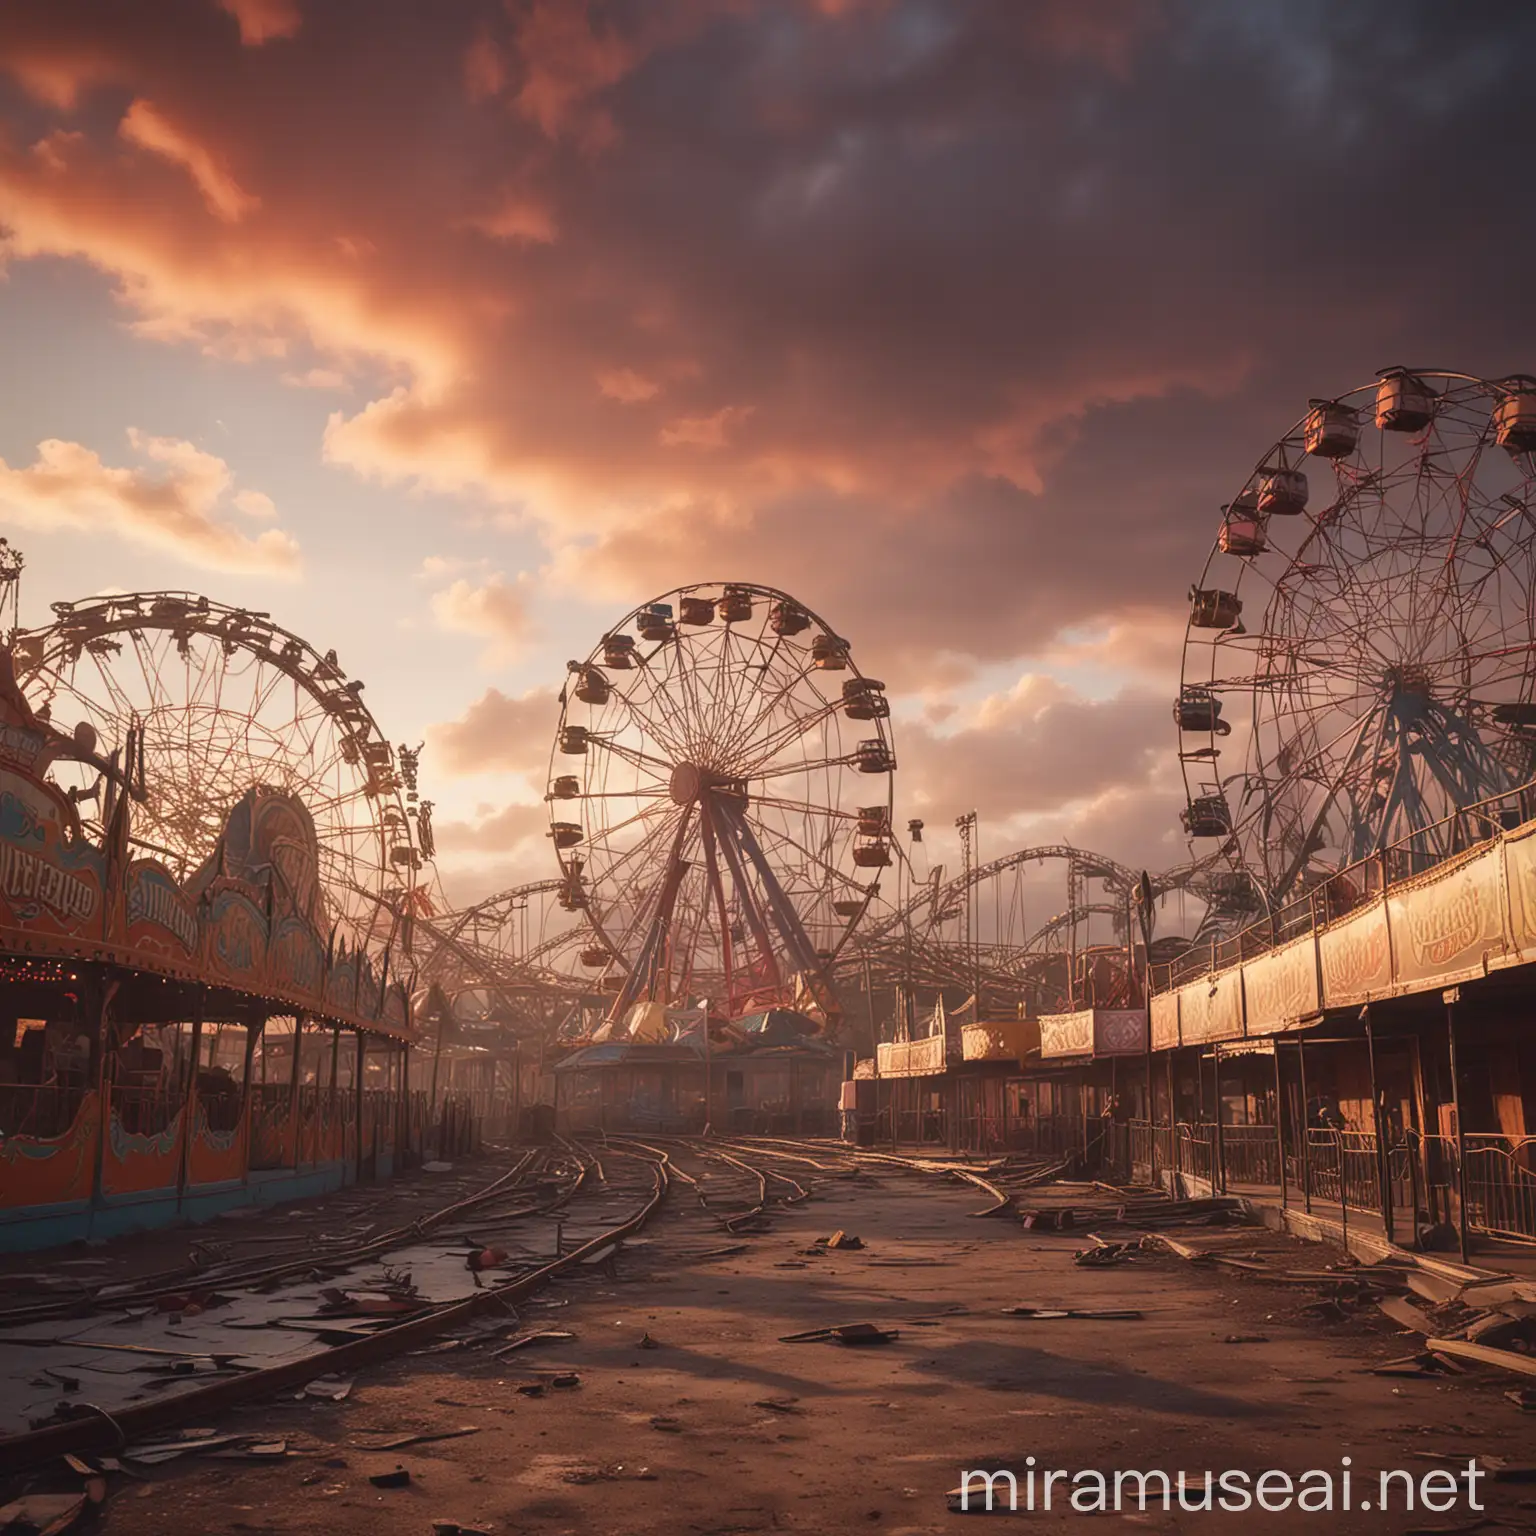 Desolate Carnival Abandoned Rollercoasters in Misty Sunset